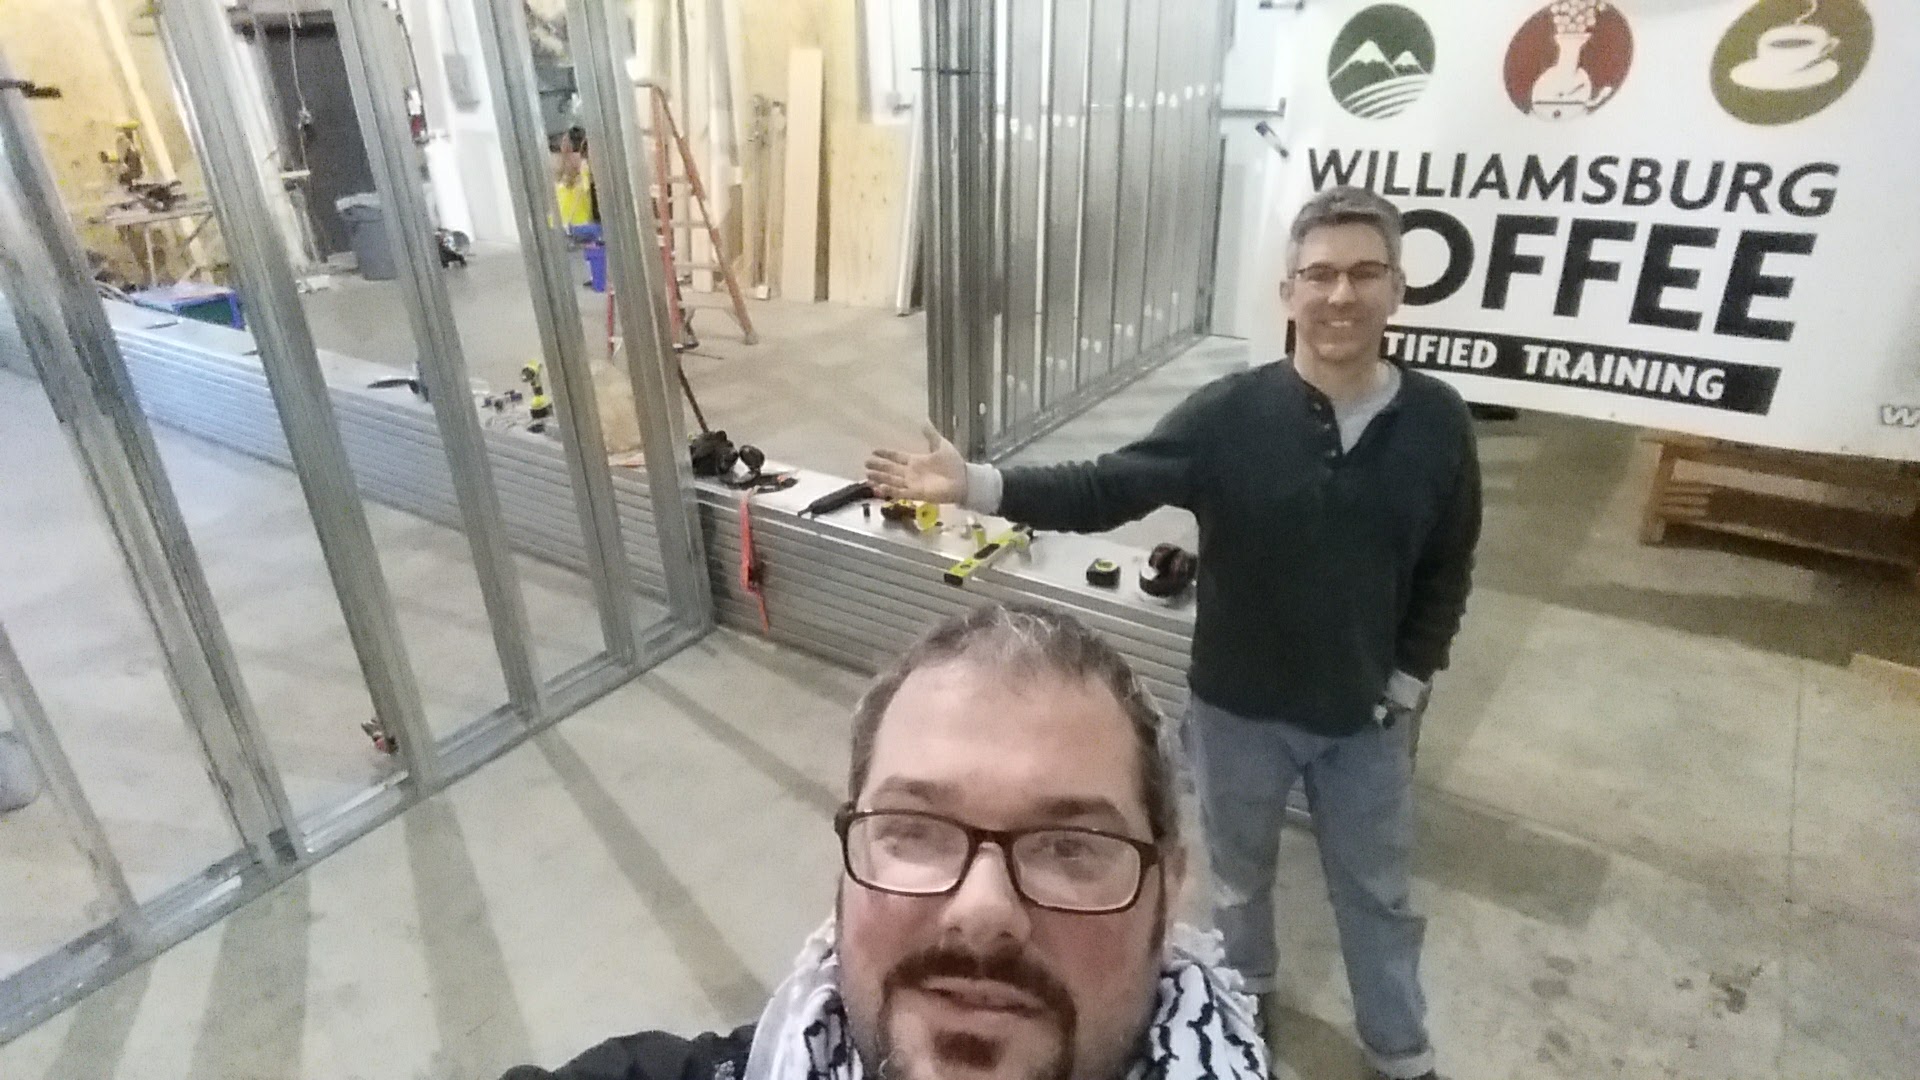 Two men stand taking a selfie in a construction zone with a wall being built in the background and sign for Williamsburg Coffee Certified Training